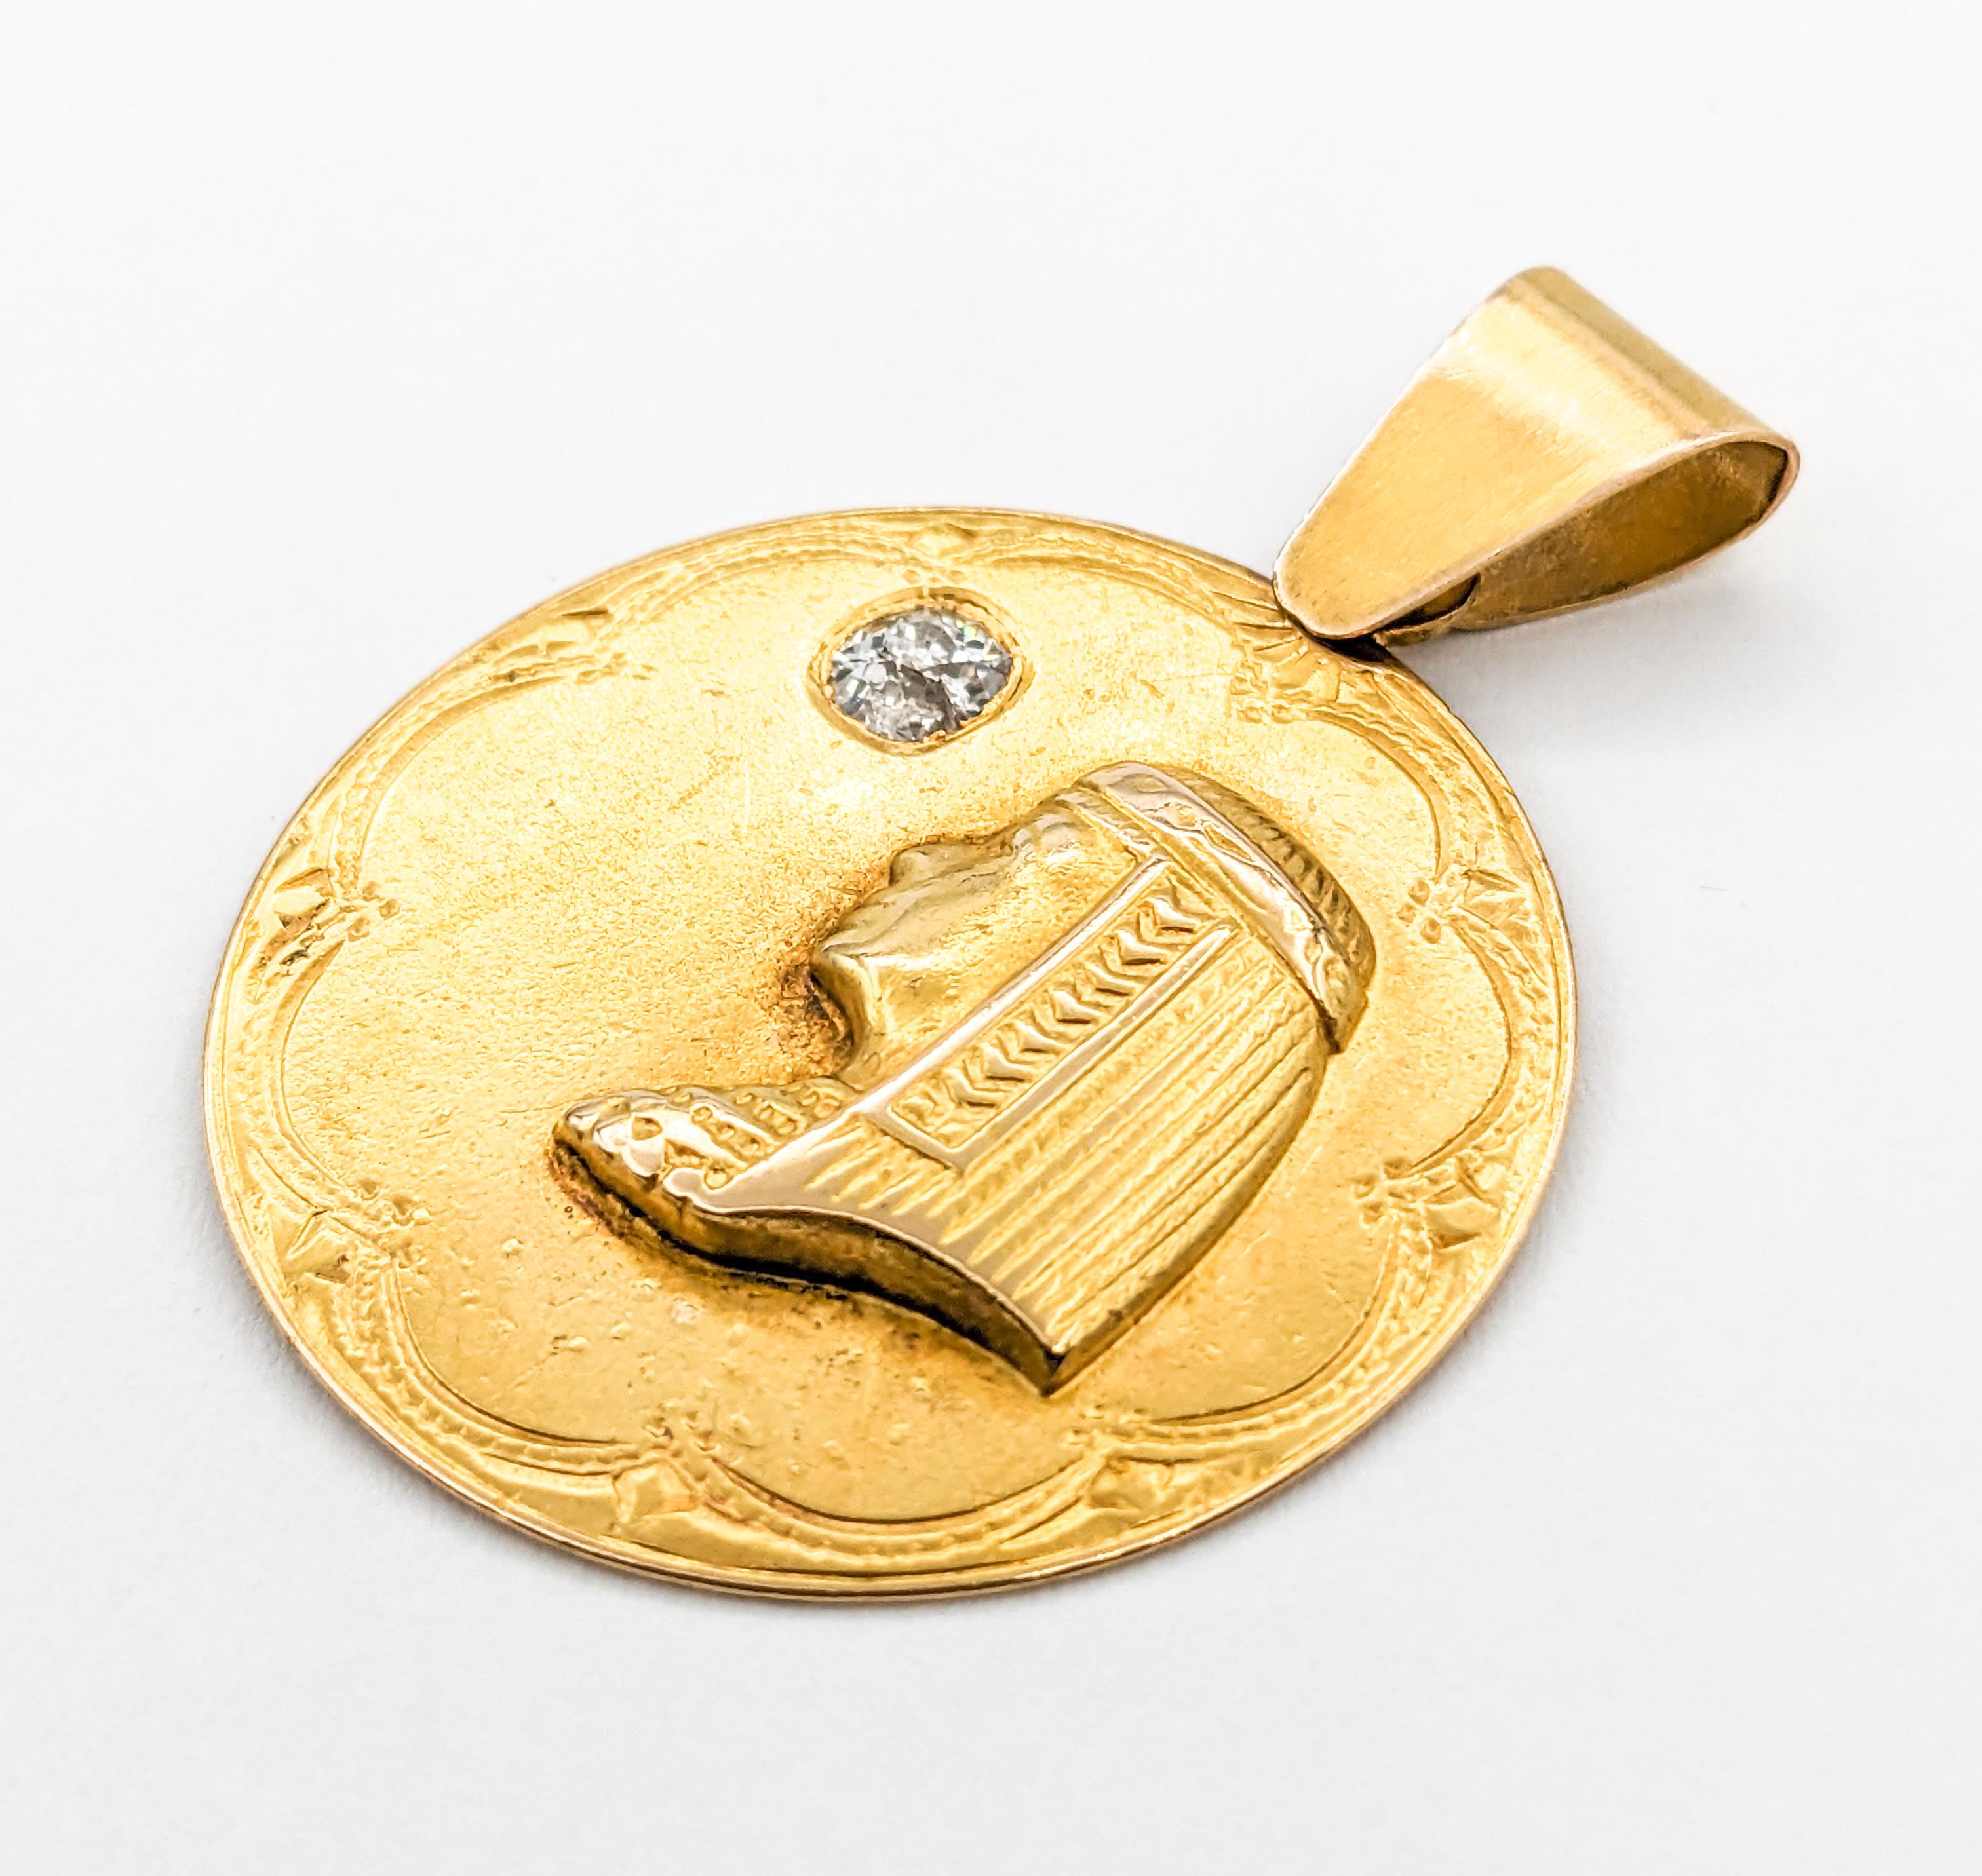 Antique Egyptian Revival Pharaoh Diamond Medallion Pendant In Yellow Gold In Excellent Condition For Sale In Bloomington, MN